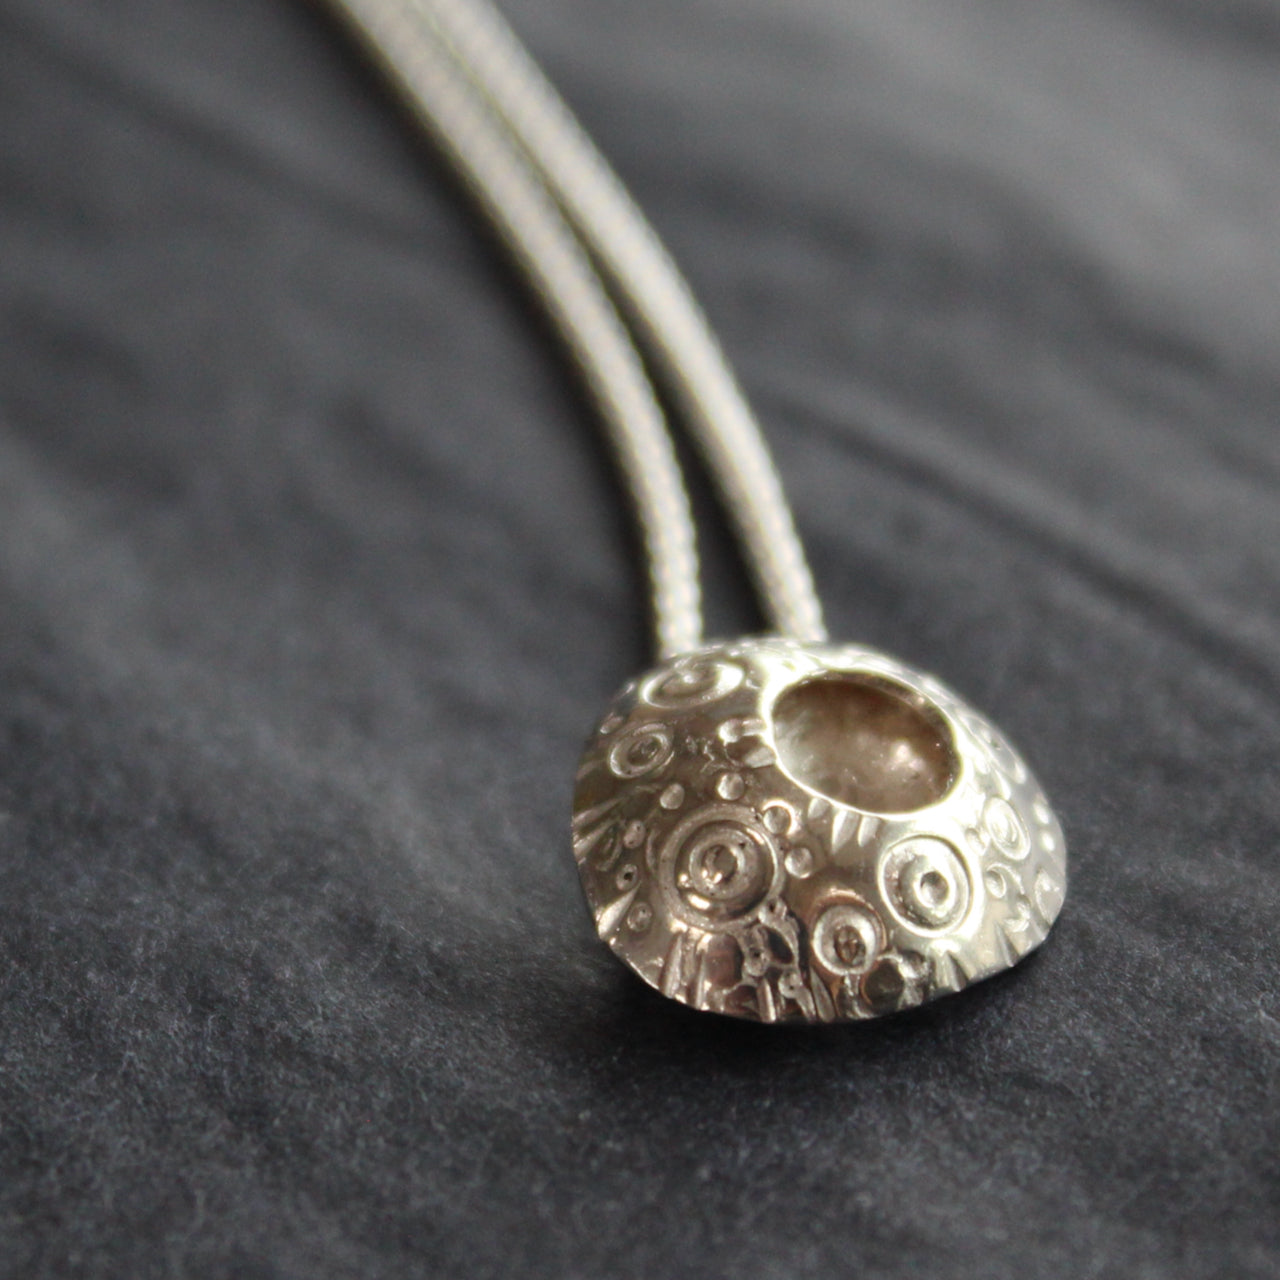 a circular silver pendant with an indented middle and a textured surface design on a silver chain by Devon jewellery designer Ann Bruford 